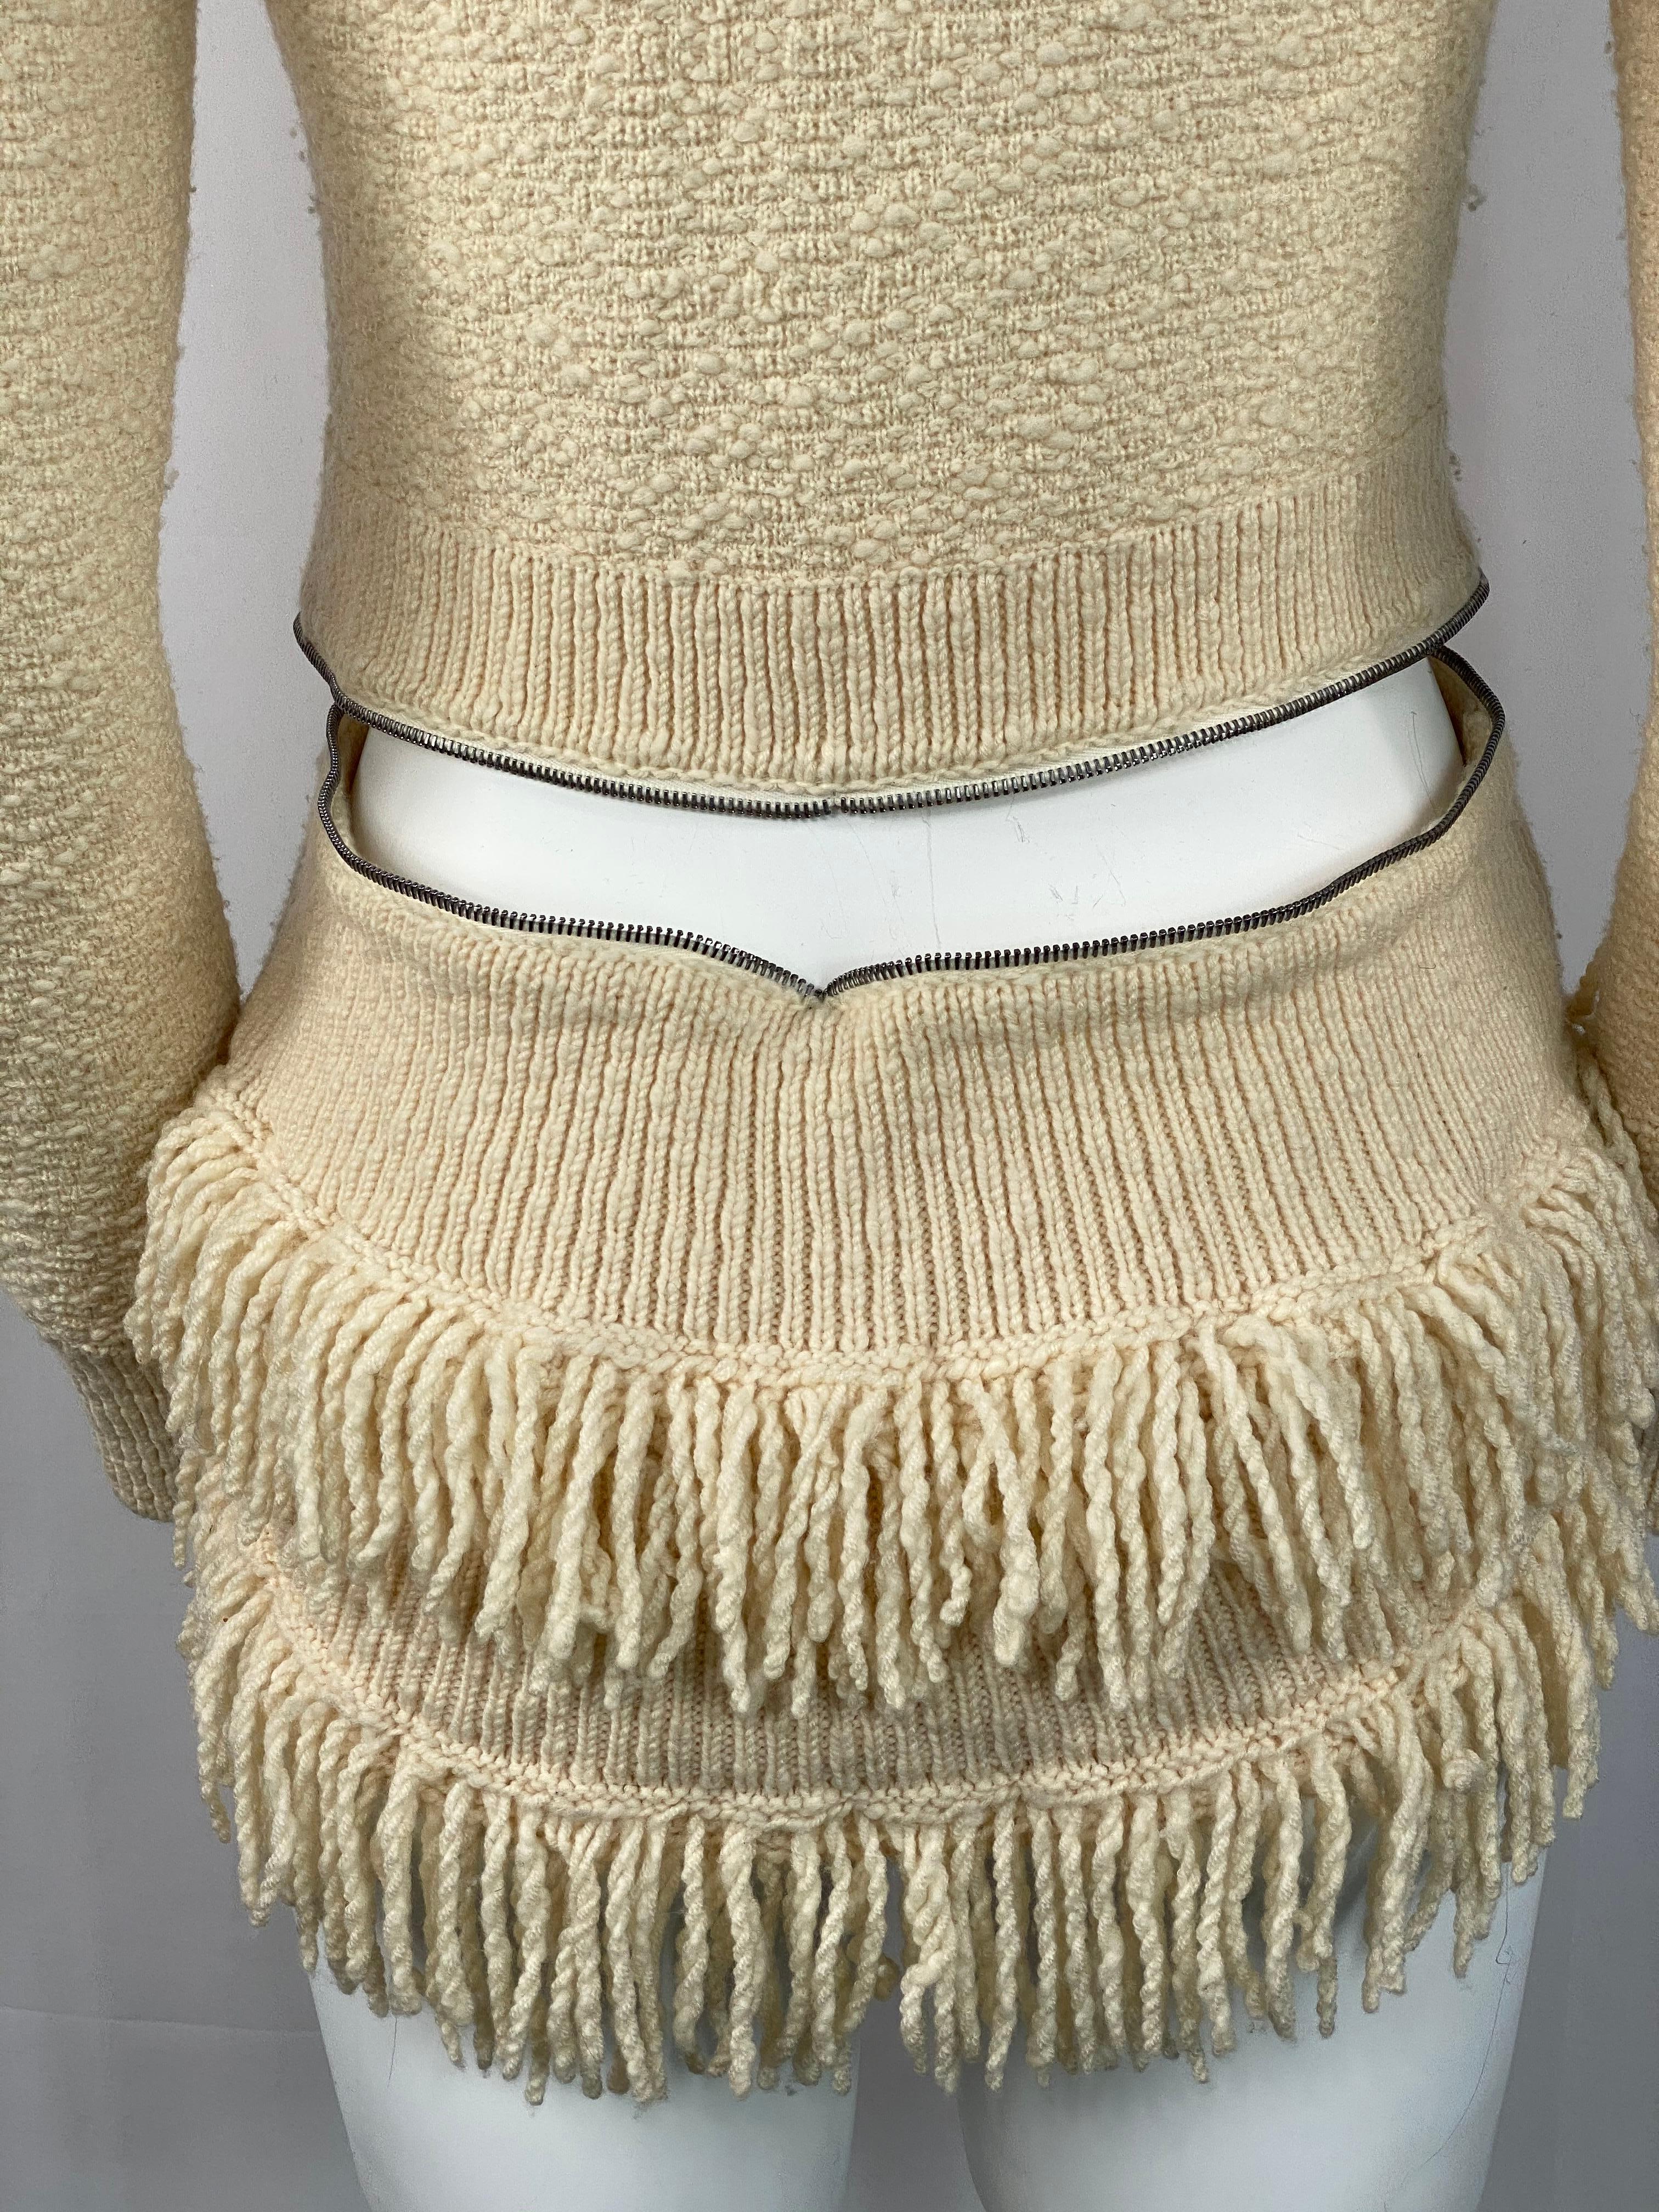 Alexander McQueen Ivory/ Cream Sweater Cardigan Top, Size Large In Excellent Condition For Sale In Beverly Hills, CA